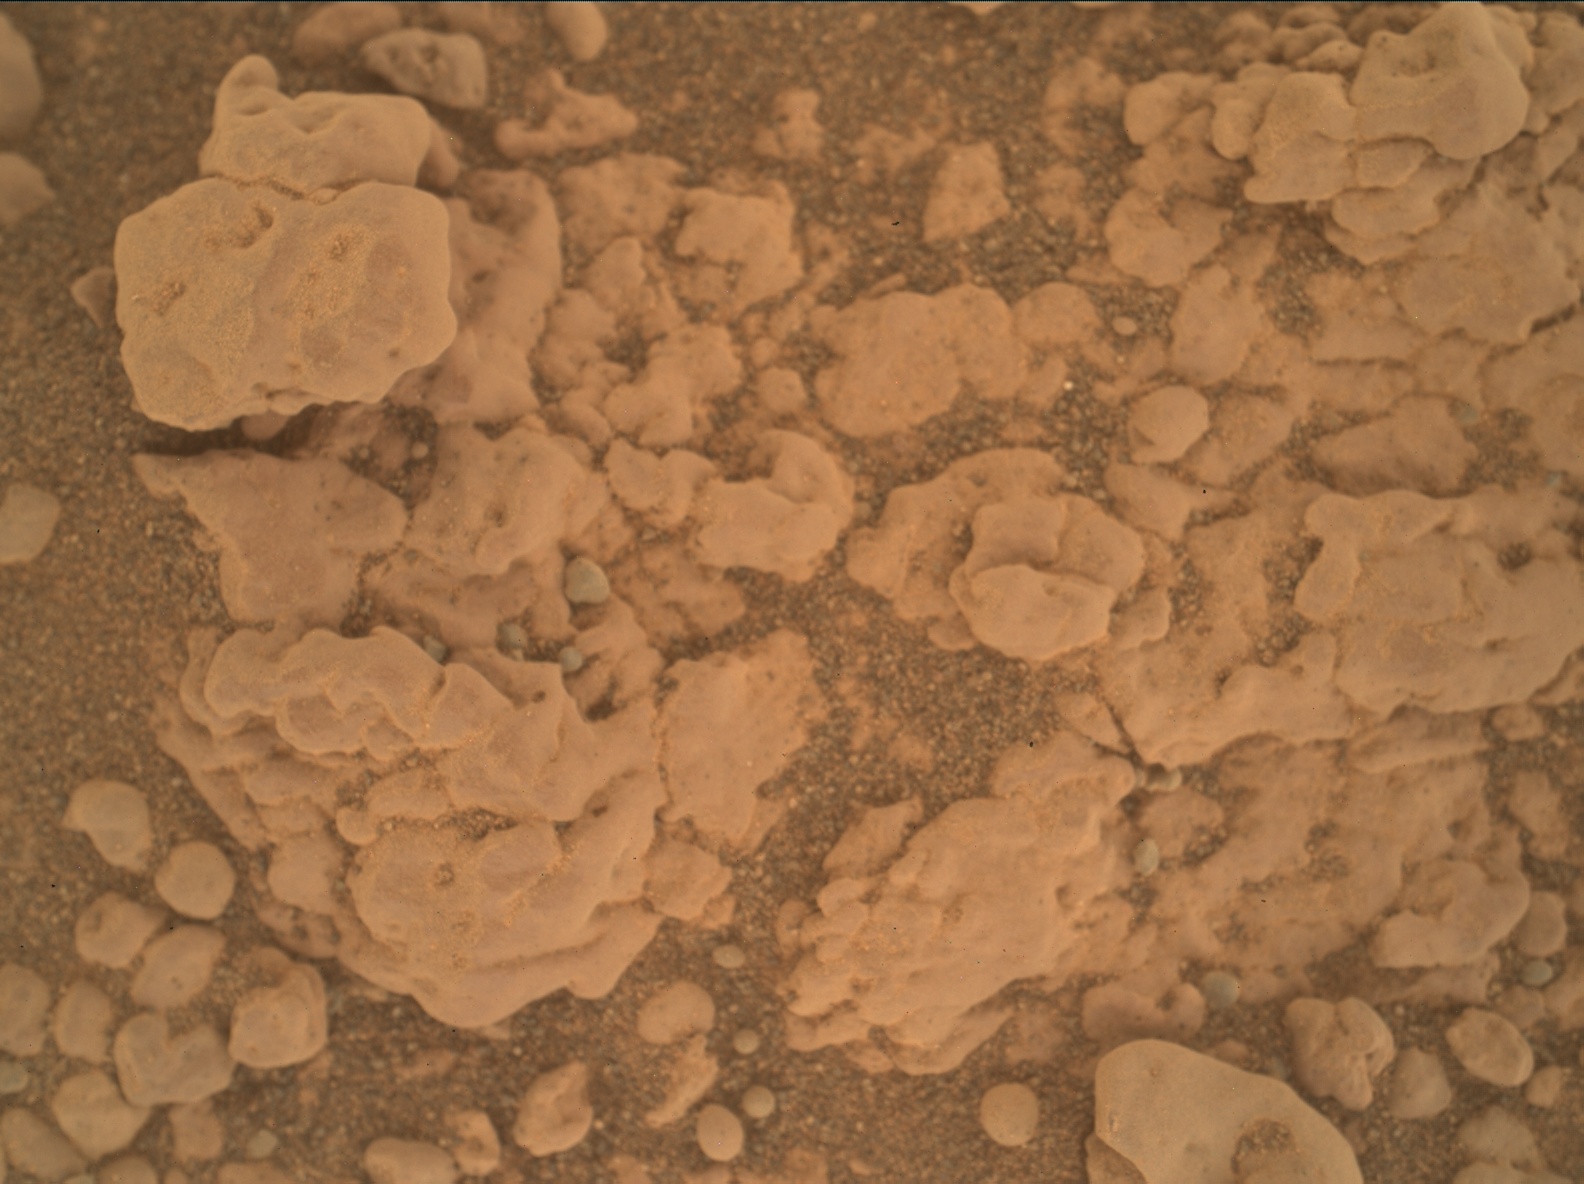 Nasa's Mars rover Curiosity acquired this image using its Mars Hand Lens Imager (MAHLI) on Sol 2311